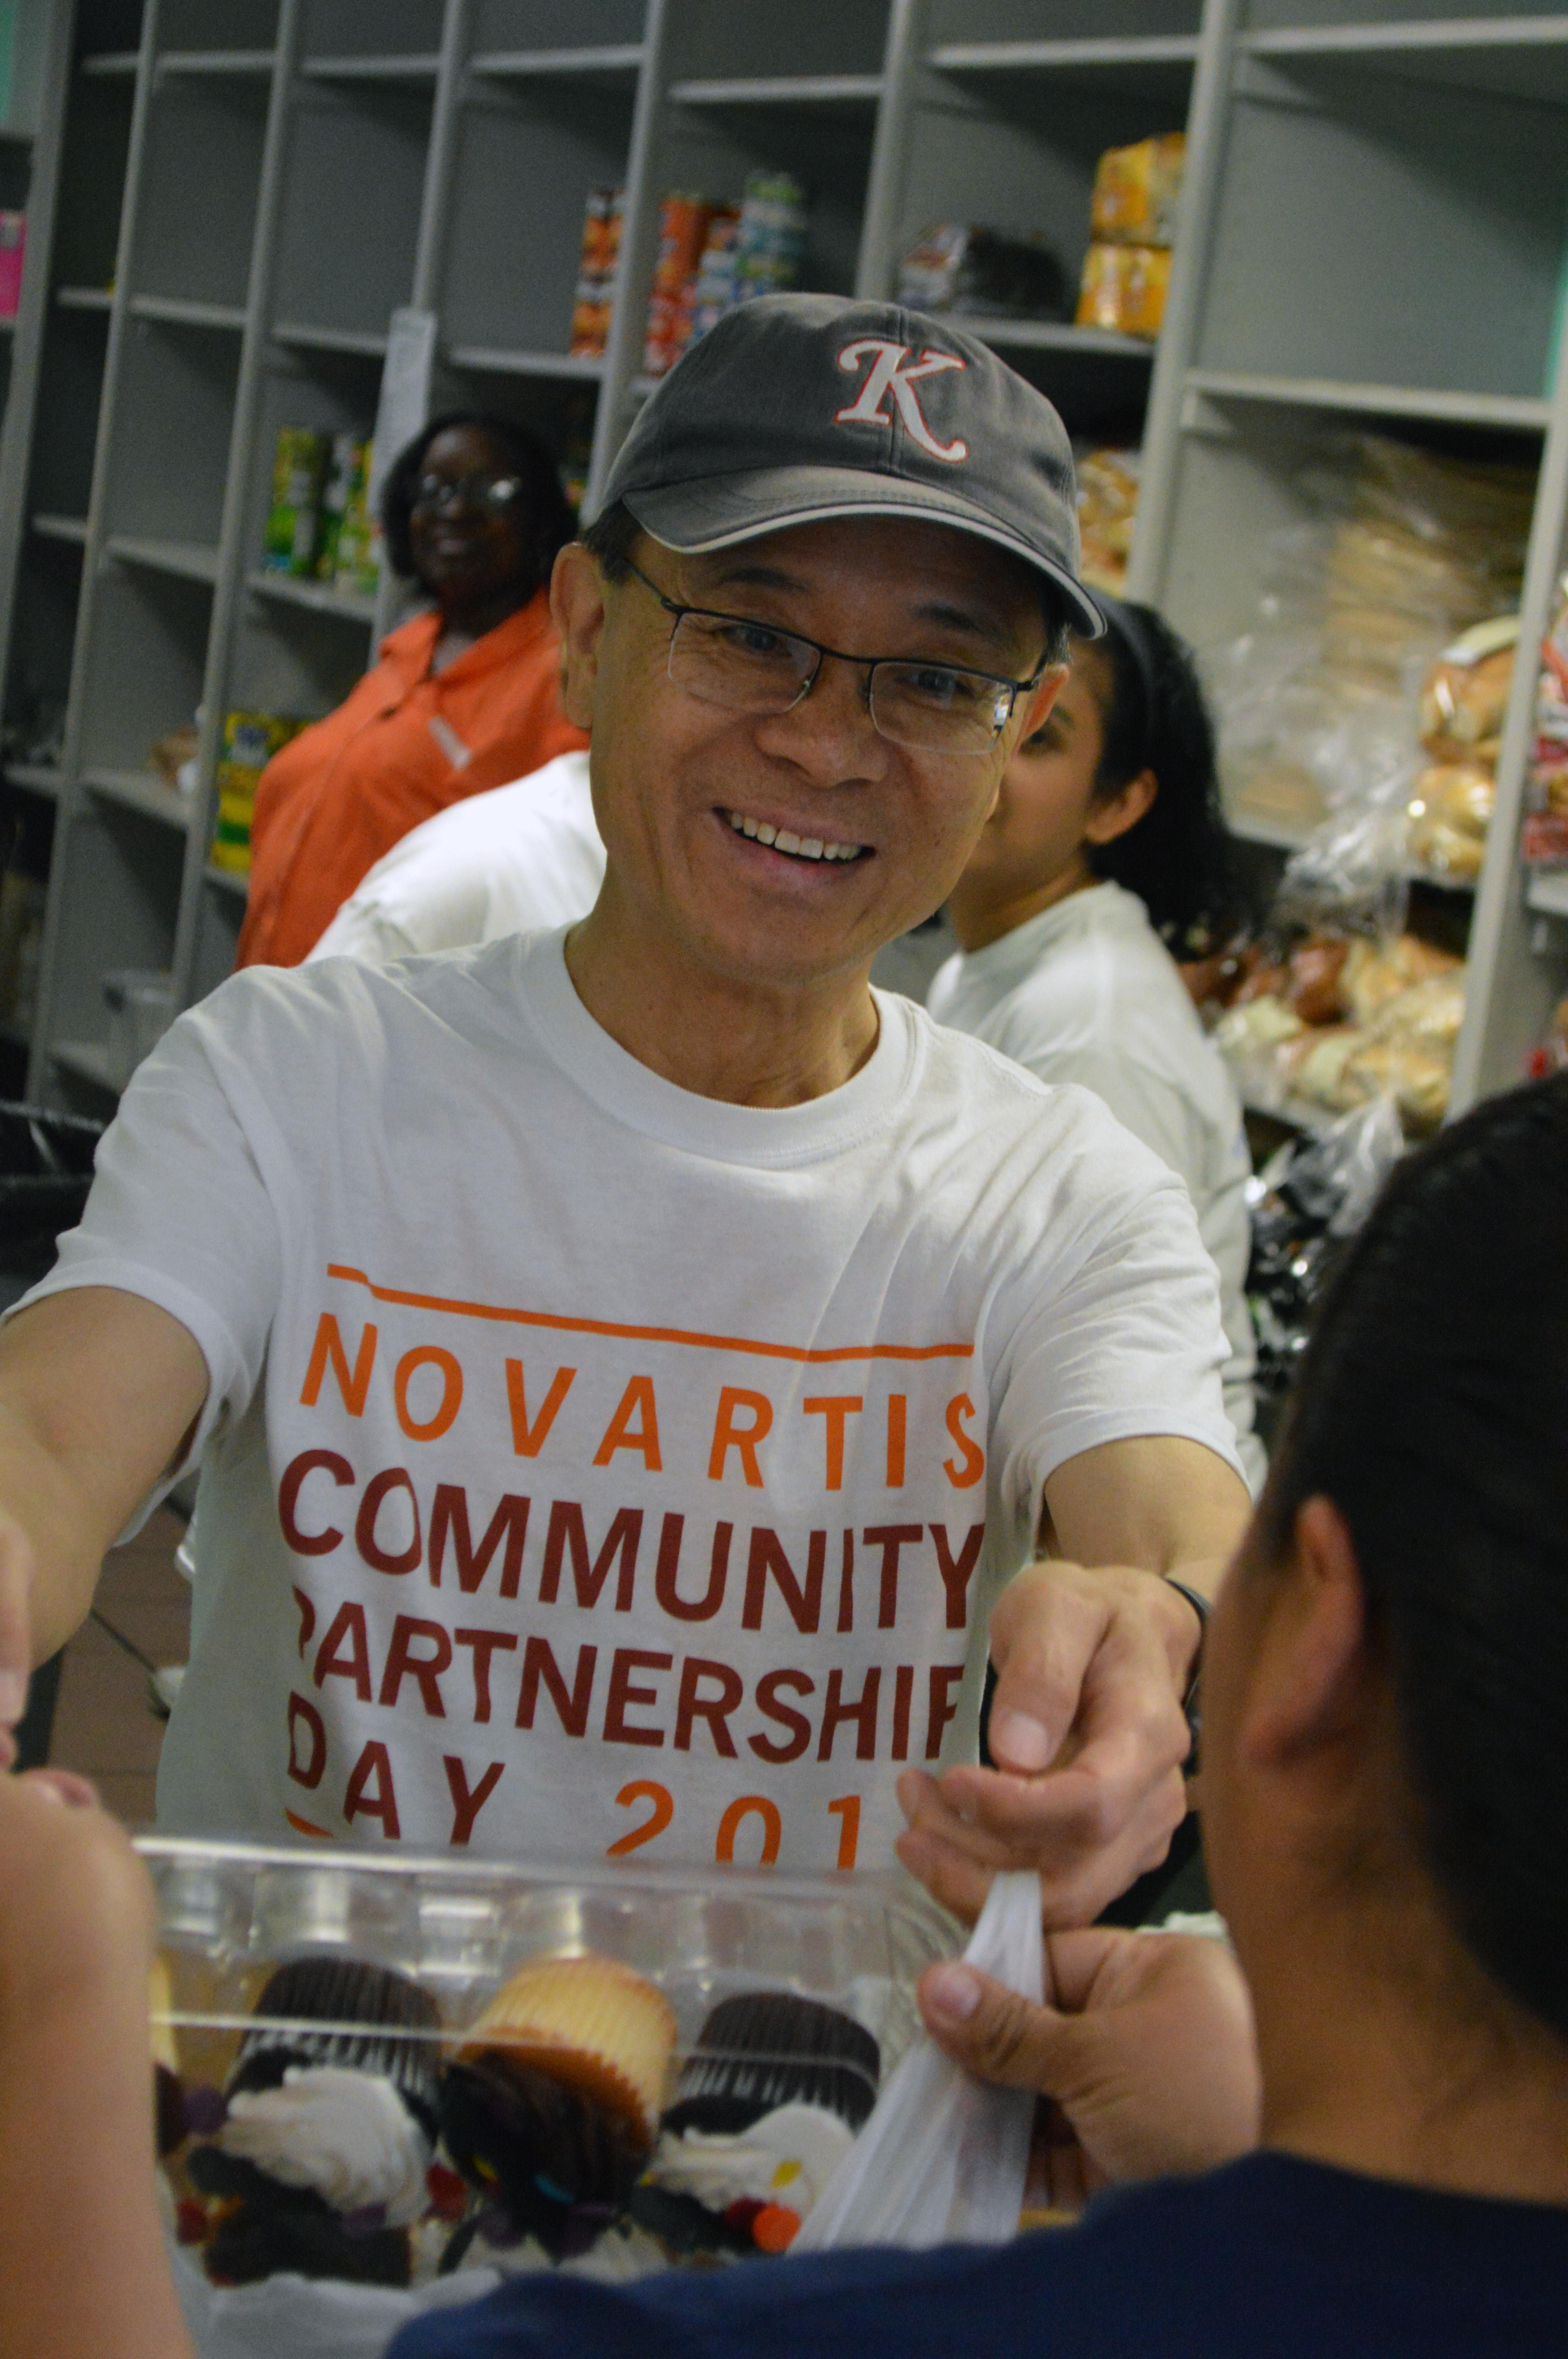 Novartis - Alcon team member volunteering in our pantry, providing food to people with such a great spirit. So thankful for all volunteers who make a difference here.